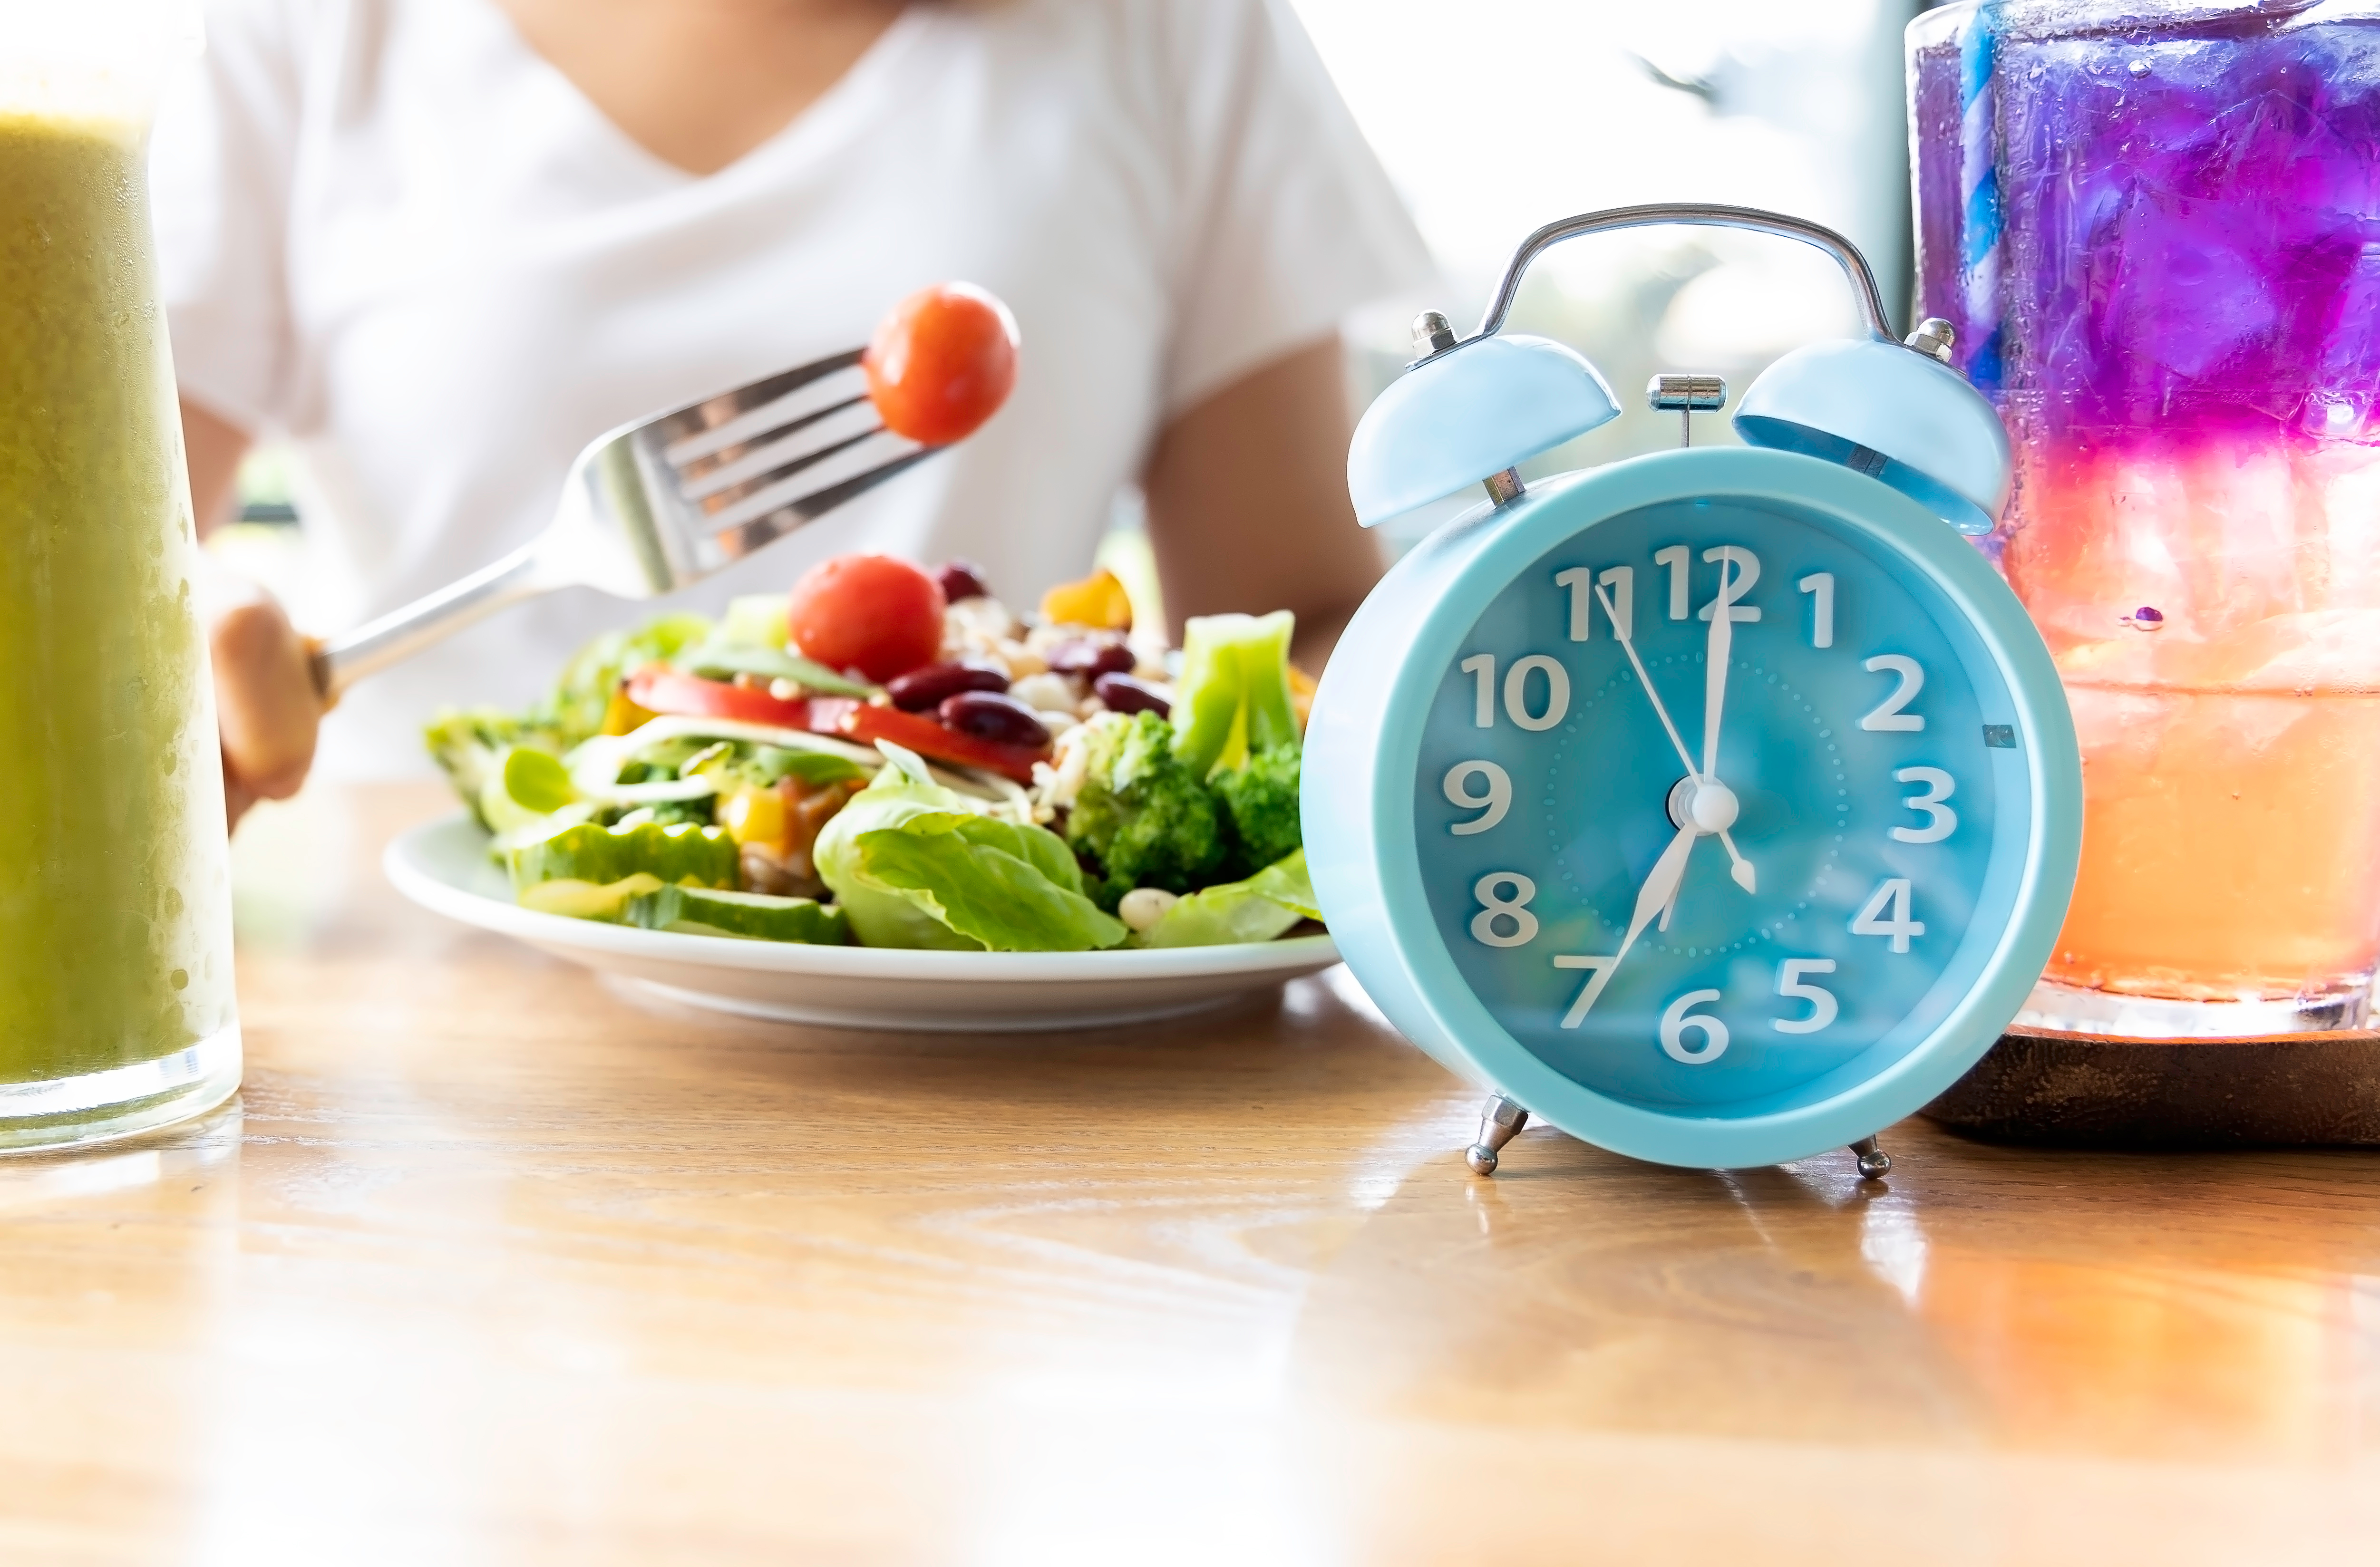 A Timeline: What Happens to Your Body During Intermittent Fasting